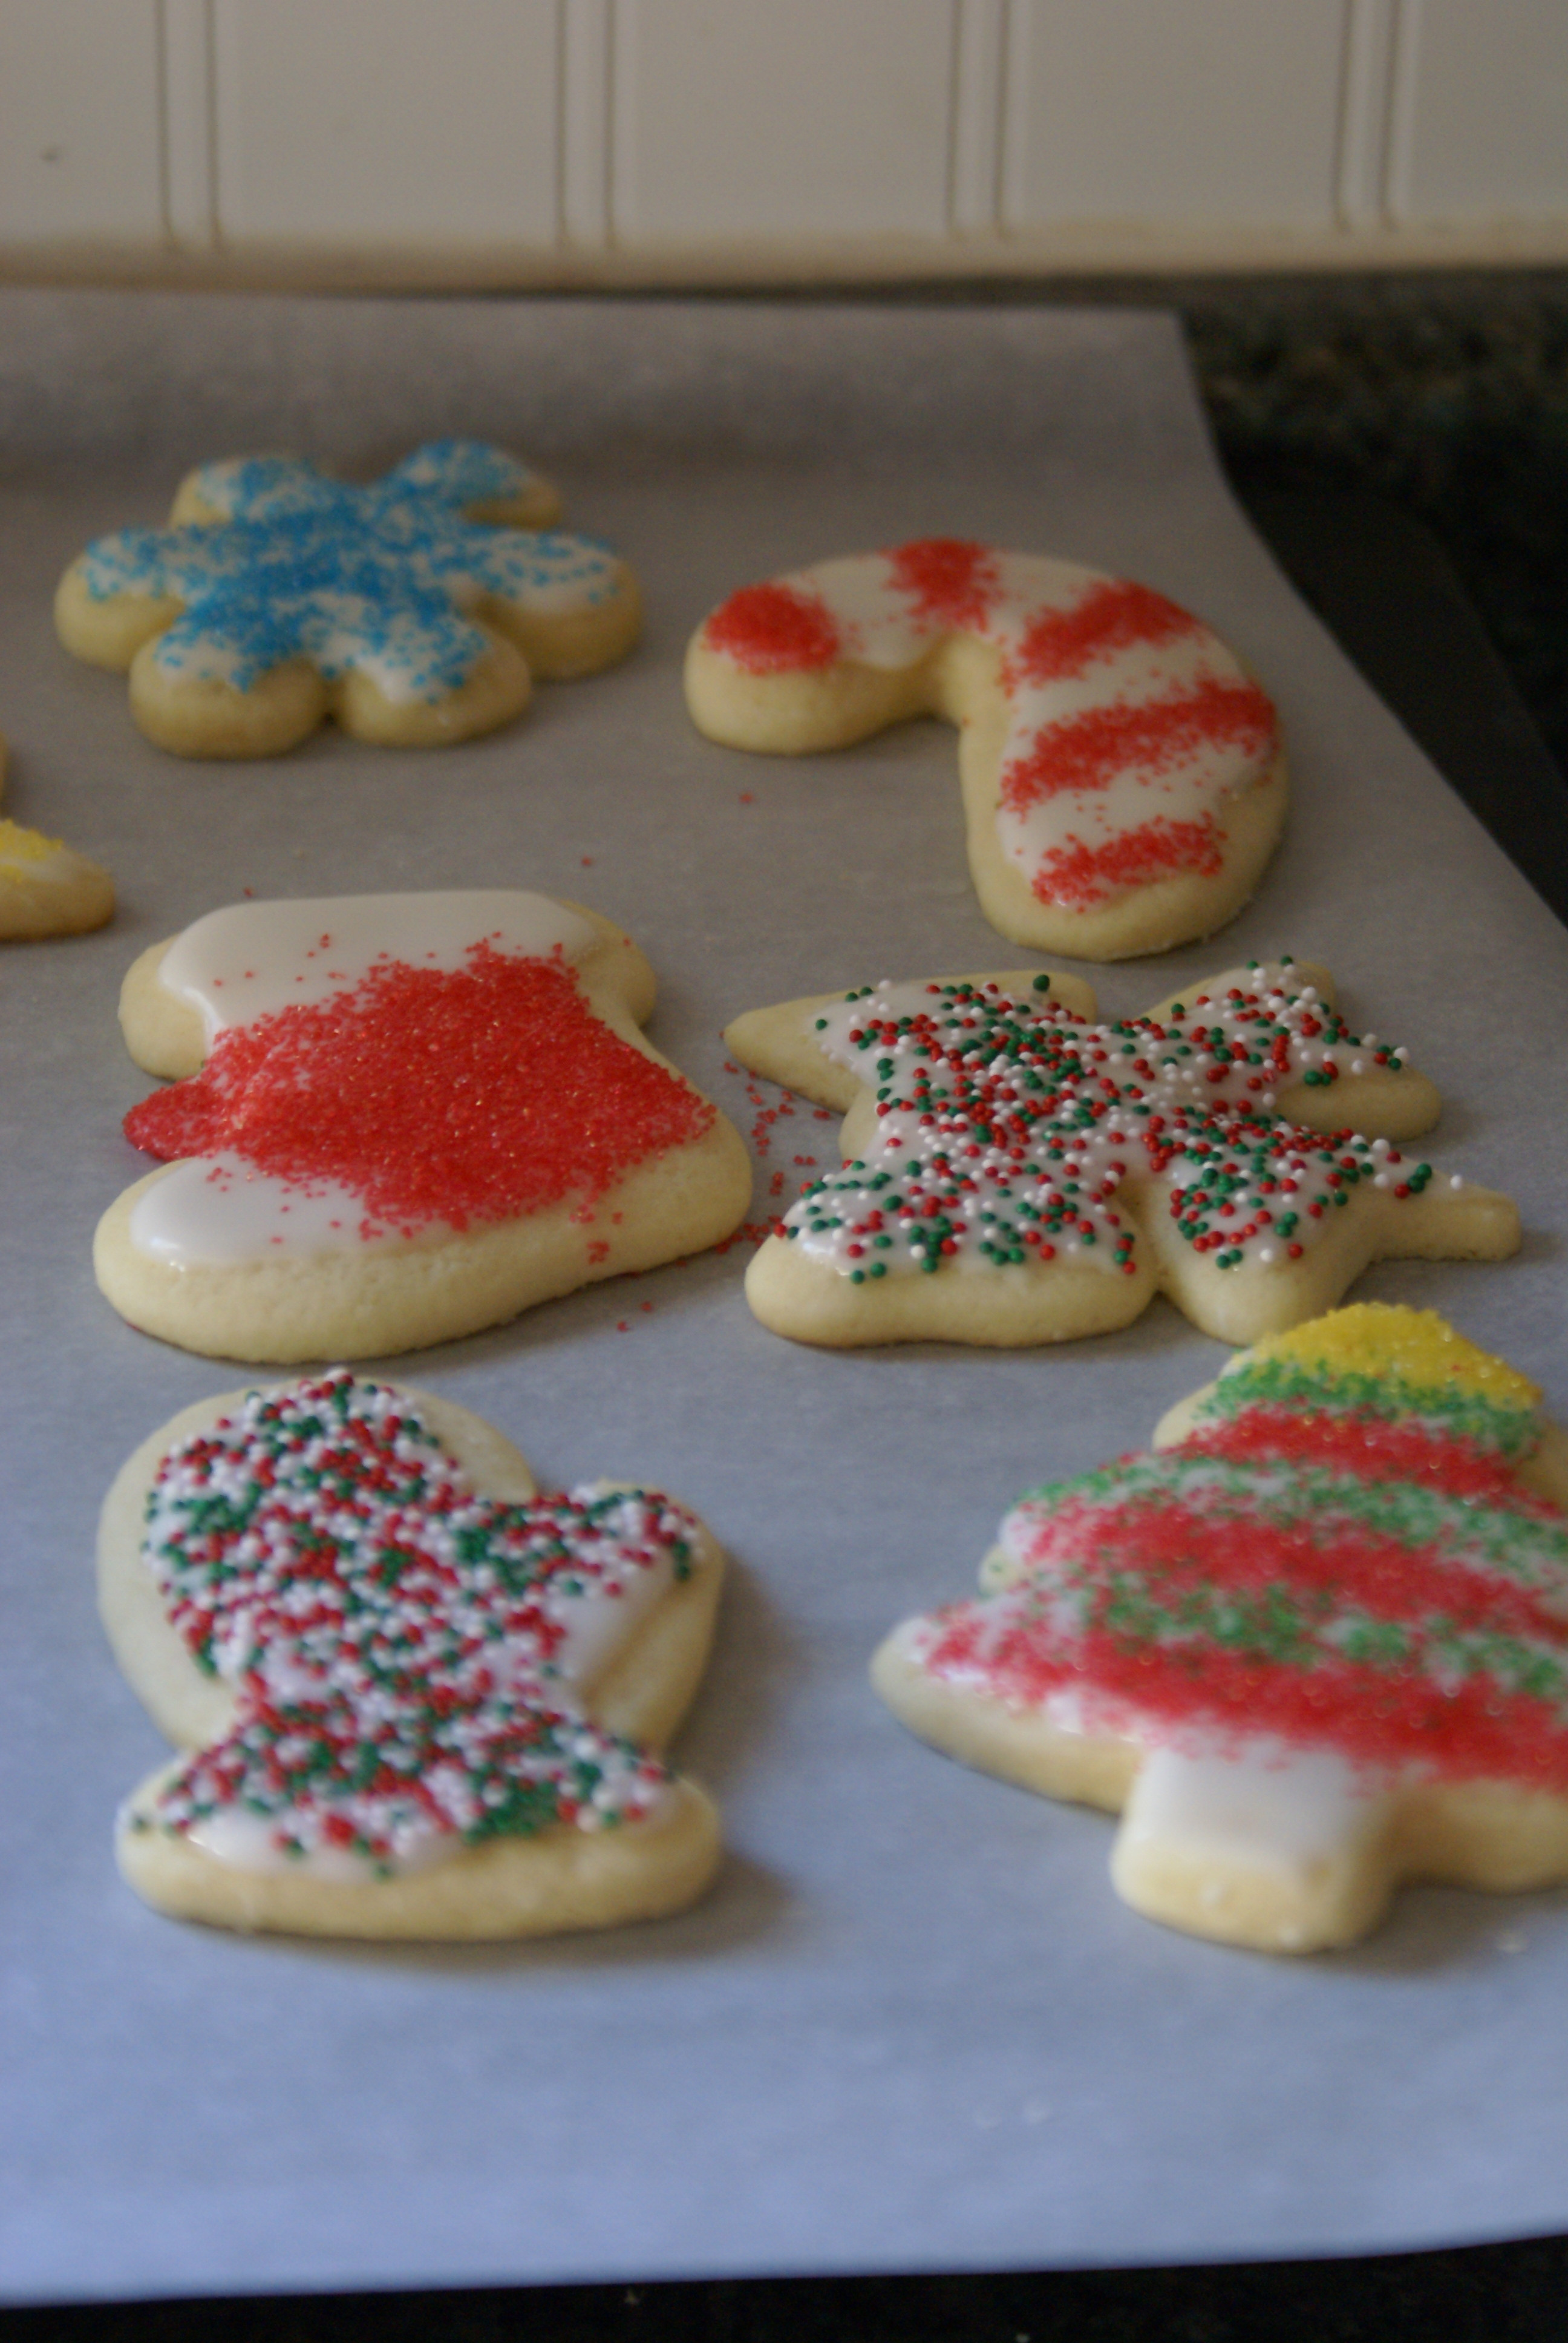 rolled christmas cookie recipes